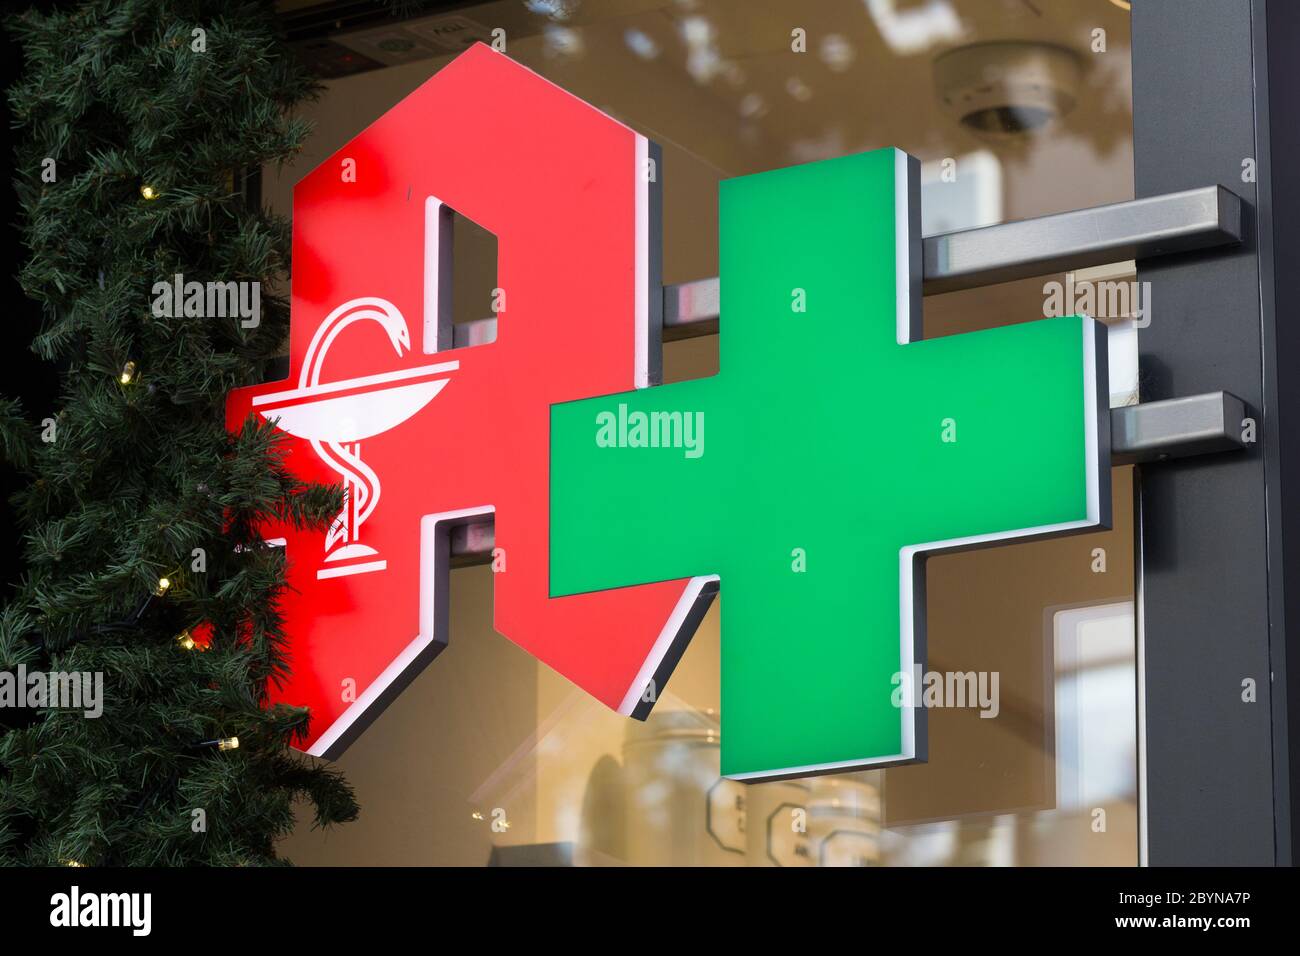 Close up of Apotheke (pharmacy / apothecary) sign / logo. Red 'A' and green cross. Stock Photo